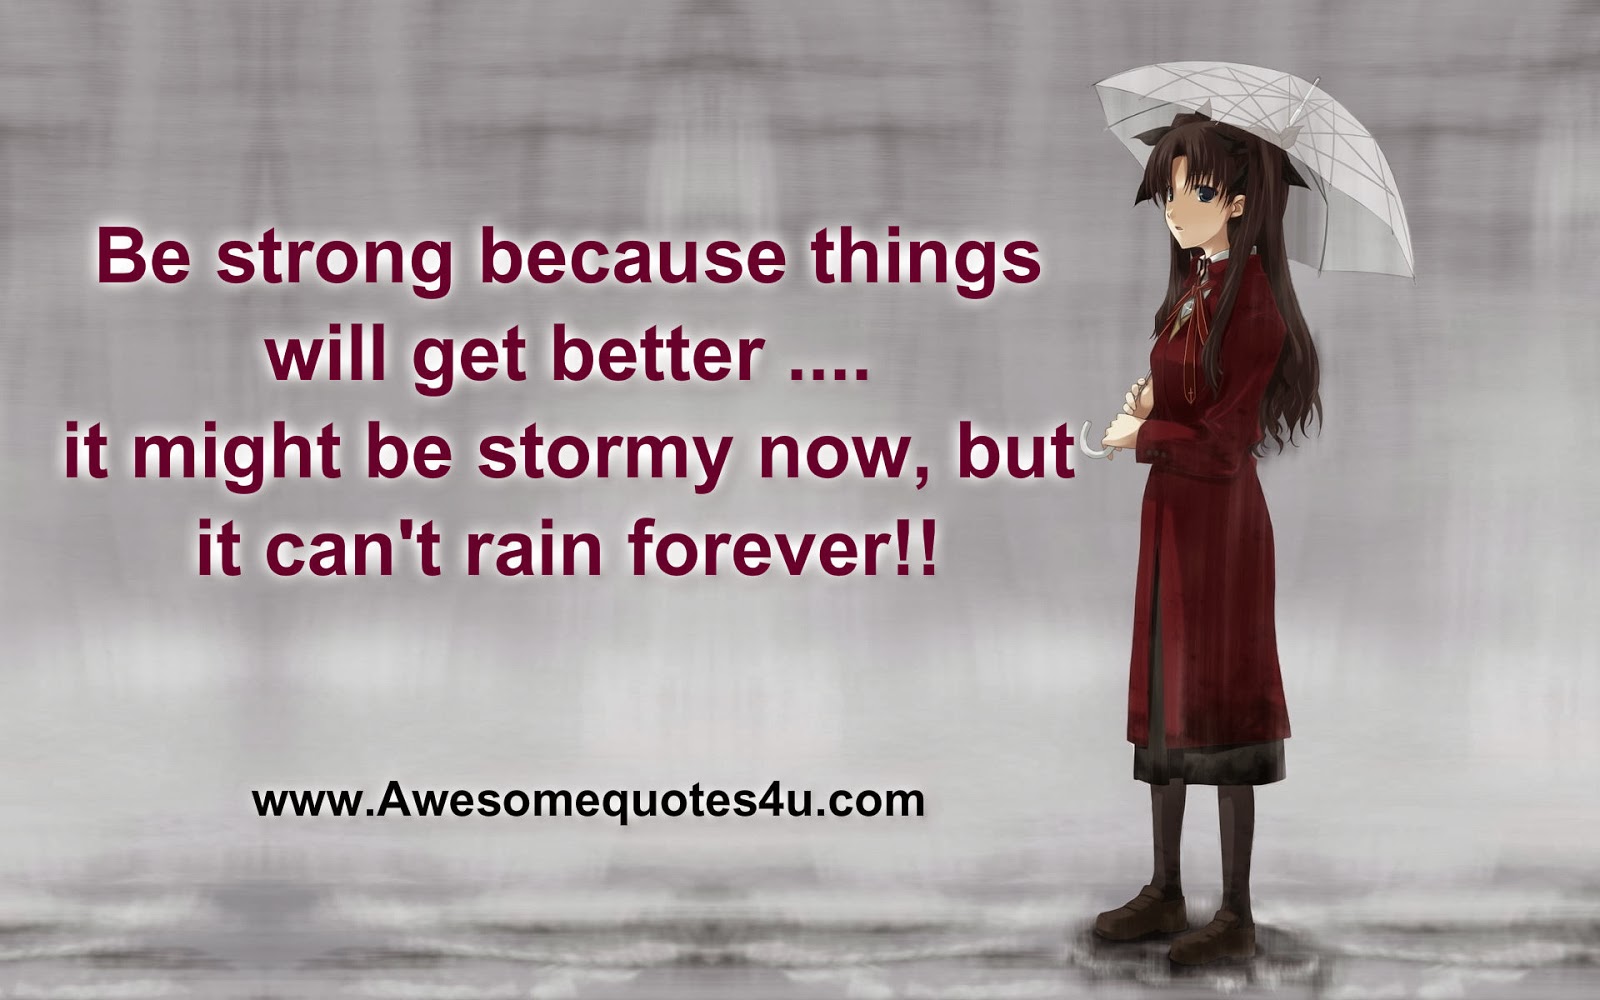 Awesome Quotes: Be strong because things will get better